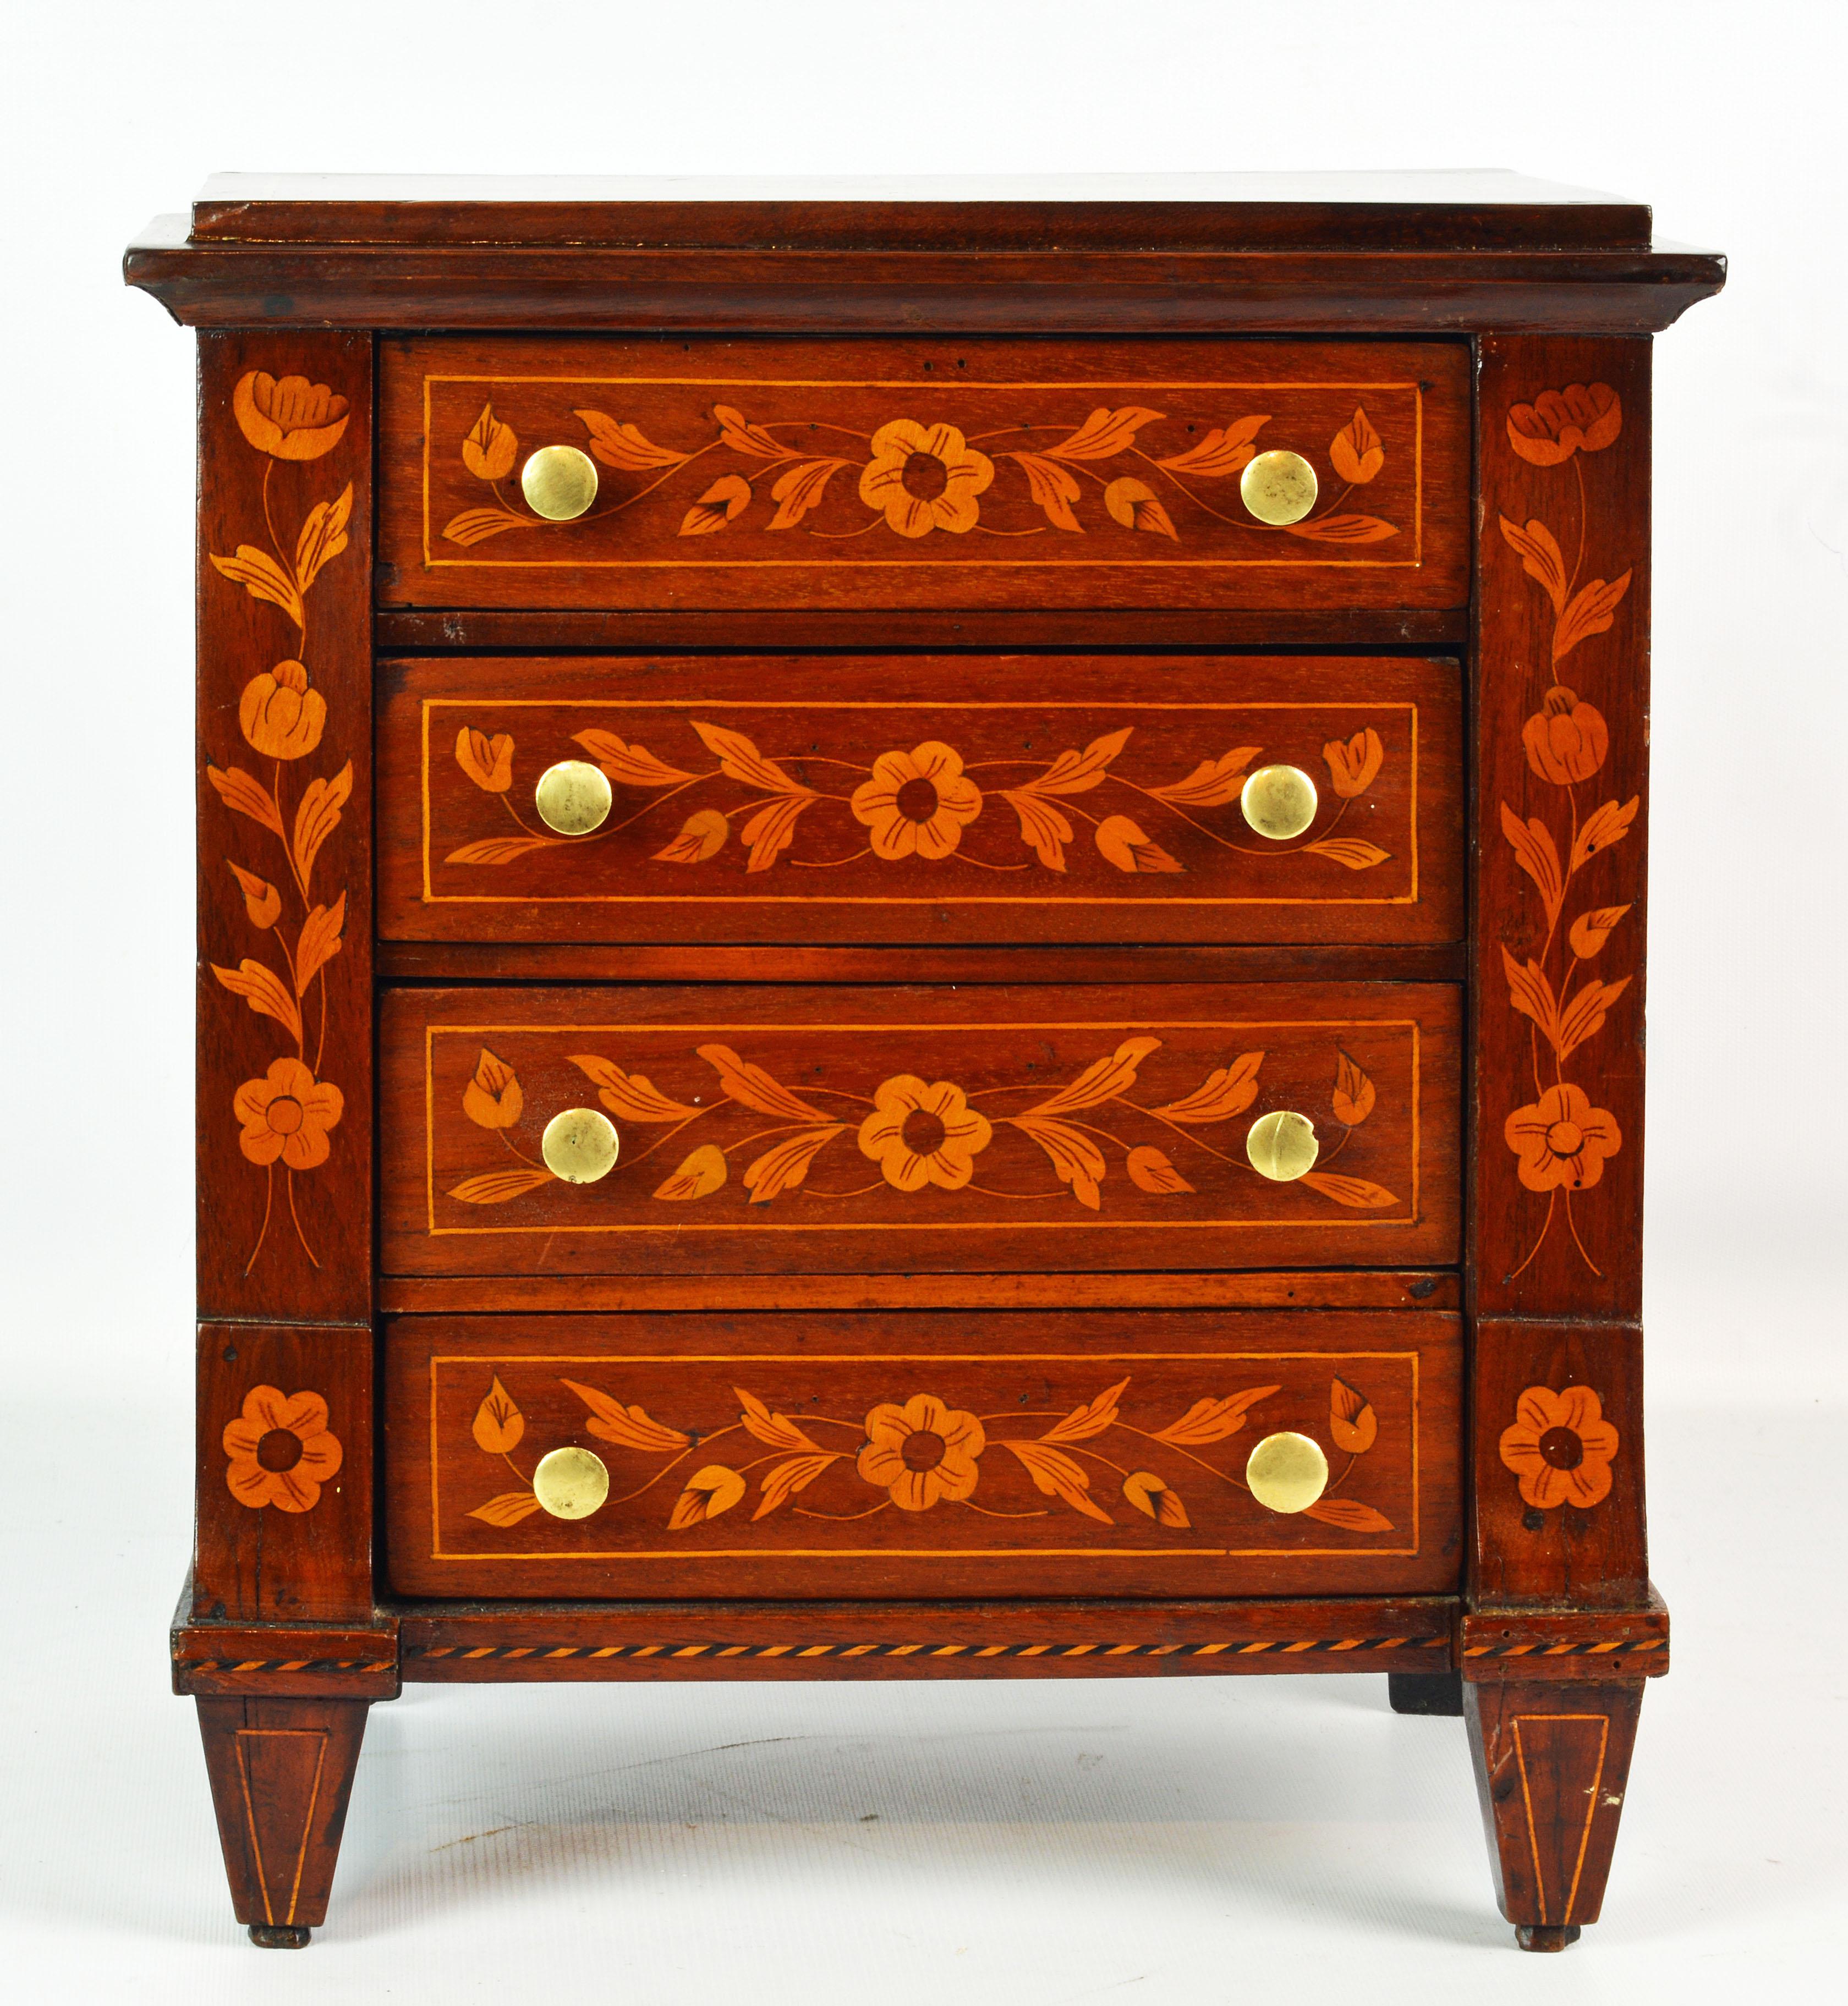 This adorable Italian 19th century miniature chest of drawers or jewelry chest features floral inlay on the top as well as the drawer front and the sides, all very detailed and in a pleasing color combination. Two of the drawers are lined with red